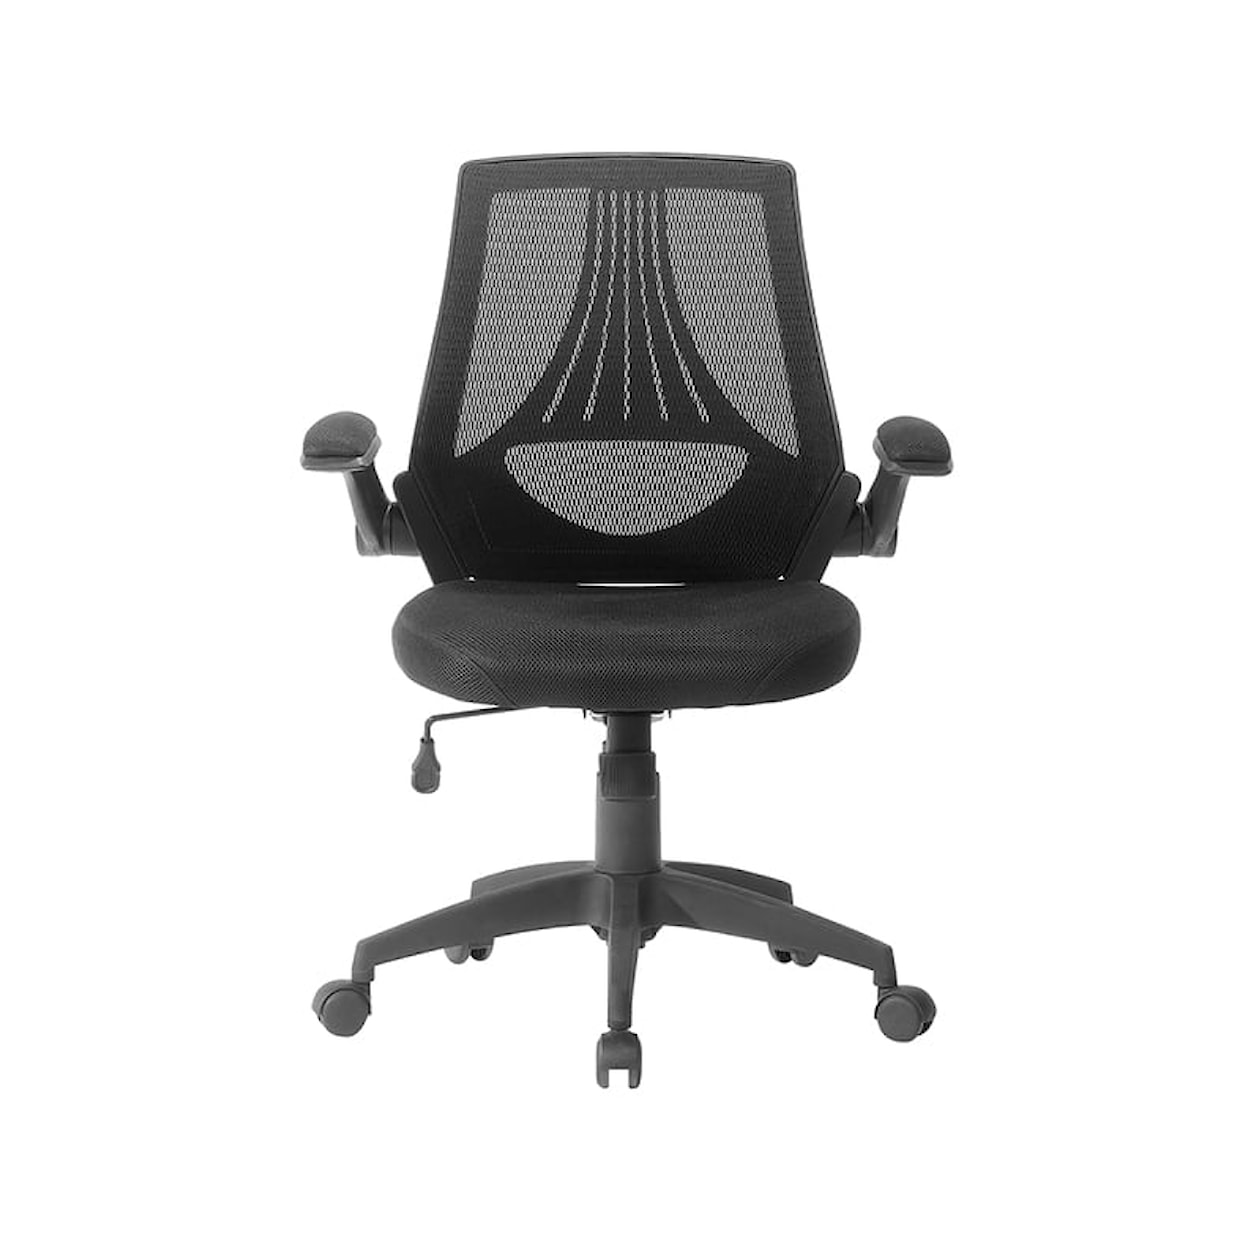 Sauder Gruga Mesh Managers Office Chair Black